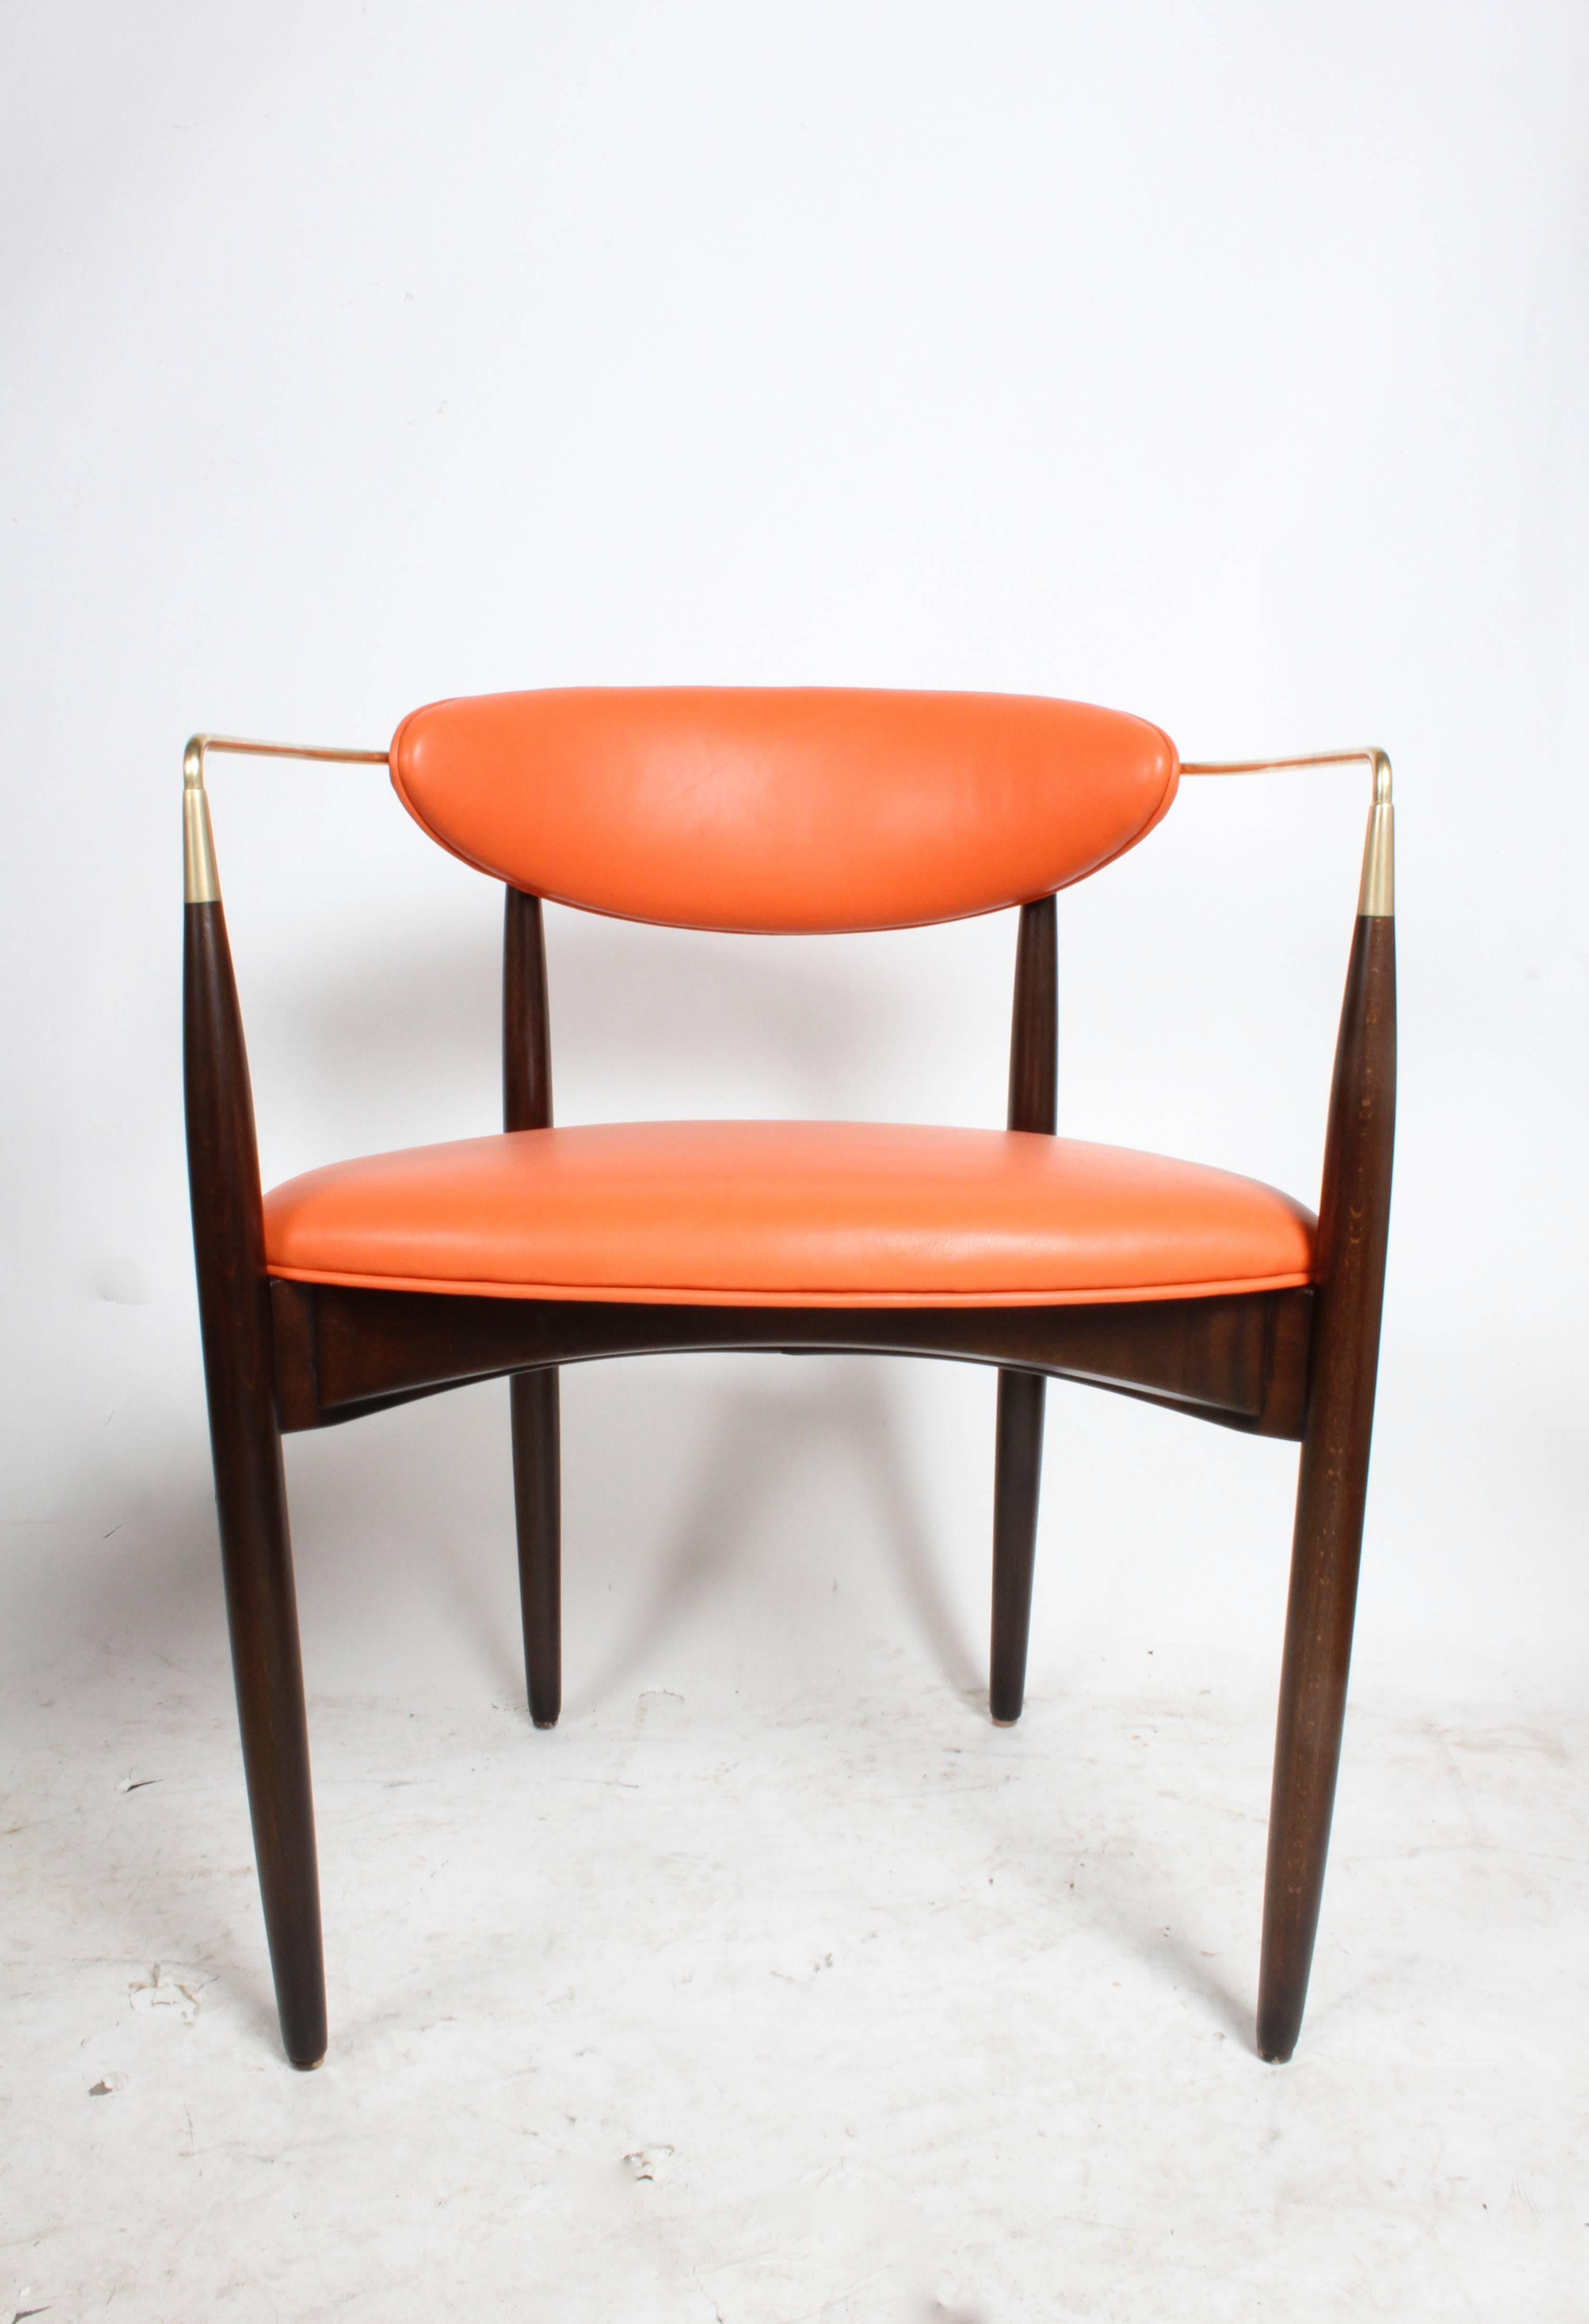 Dan Johnson "Viscount" brass armchairs, circa 1950s. Refinished in dark stain with new foam, orange leather and polished brass. Arm height 26-3/8" COM is available option on these chairs. 